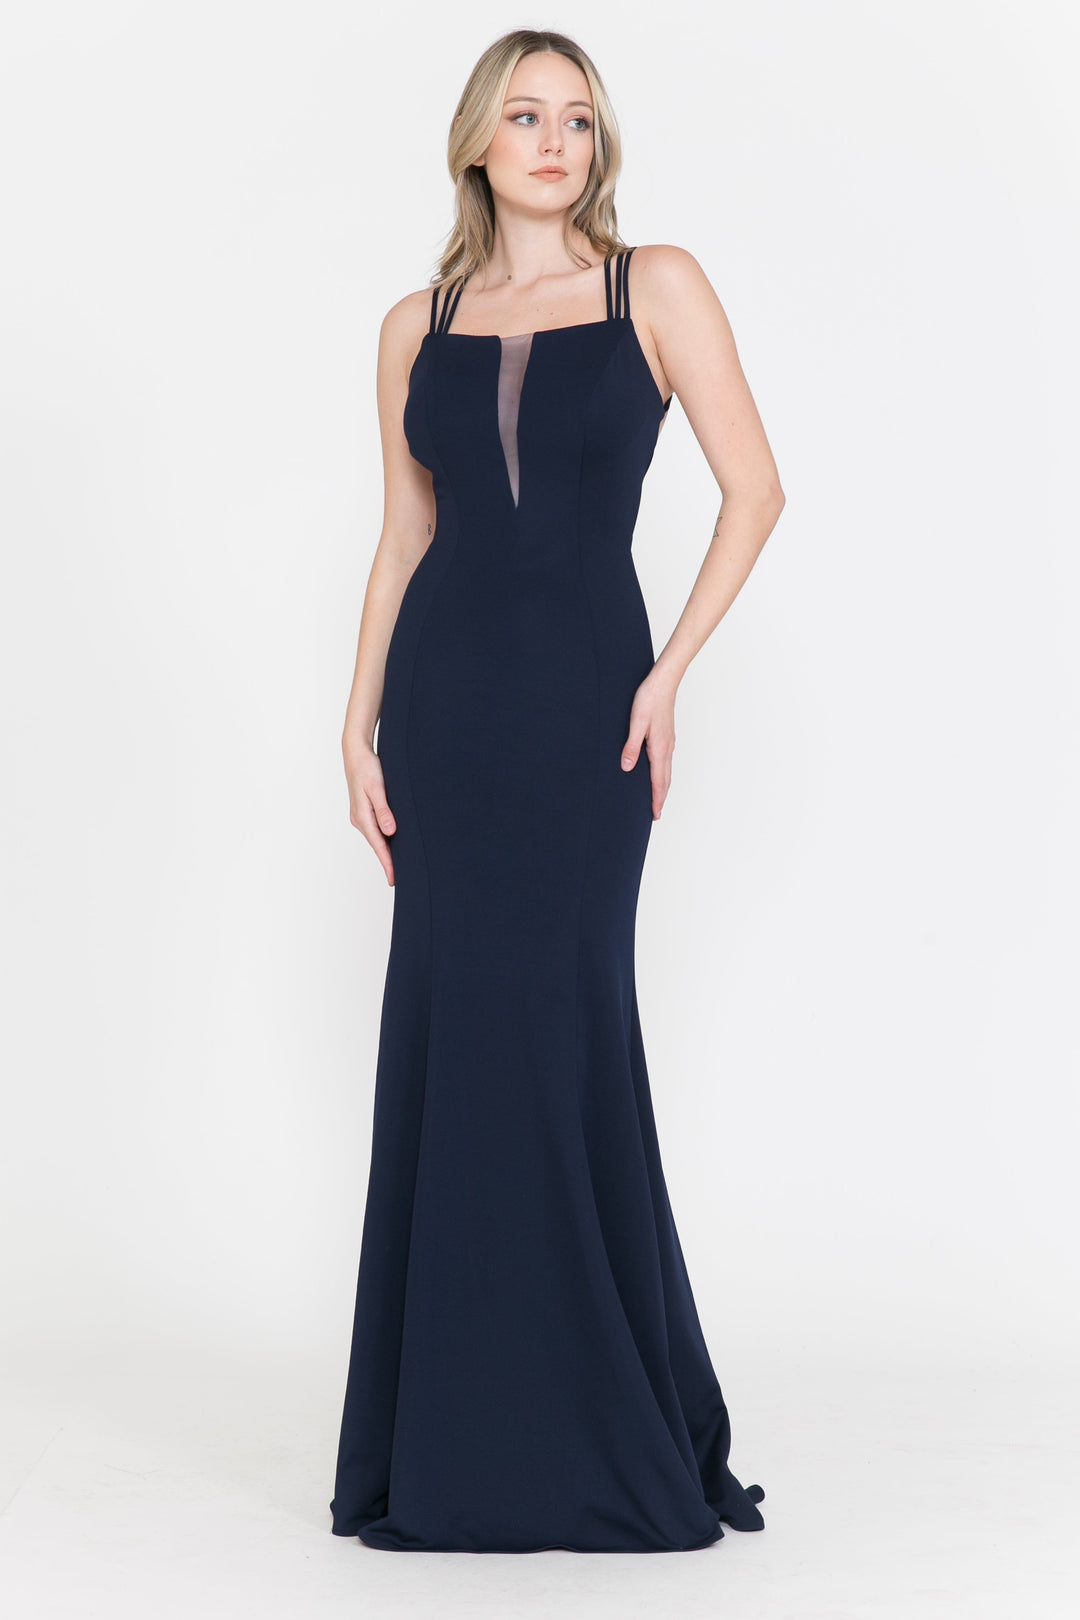 Long Strappy Open Back Dress with Illusion Panel by Poly USA 8468